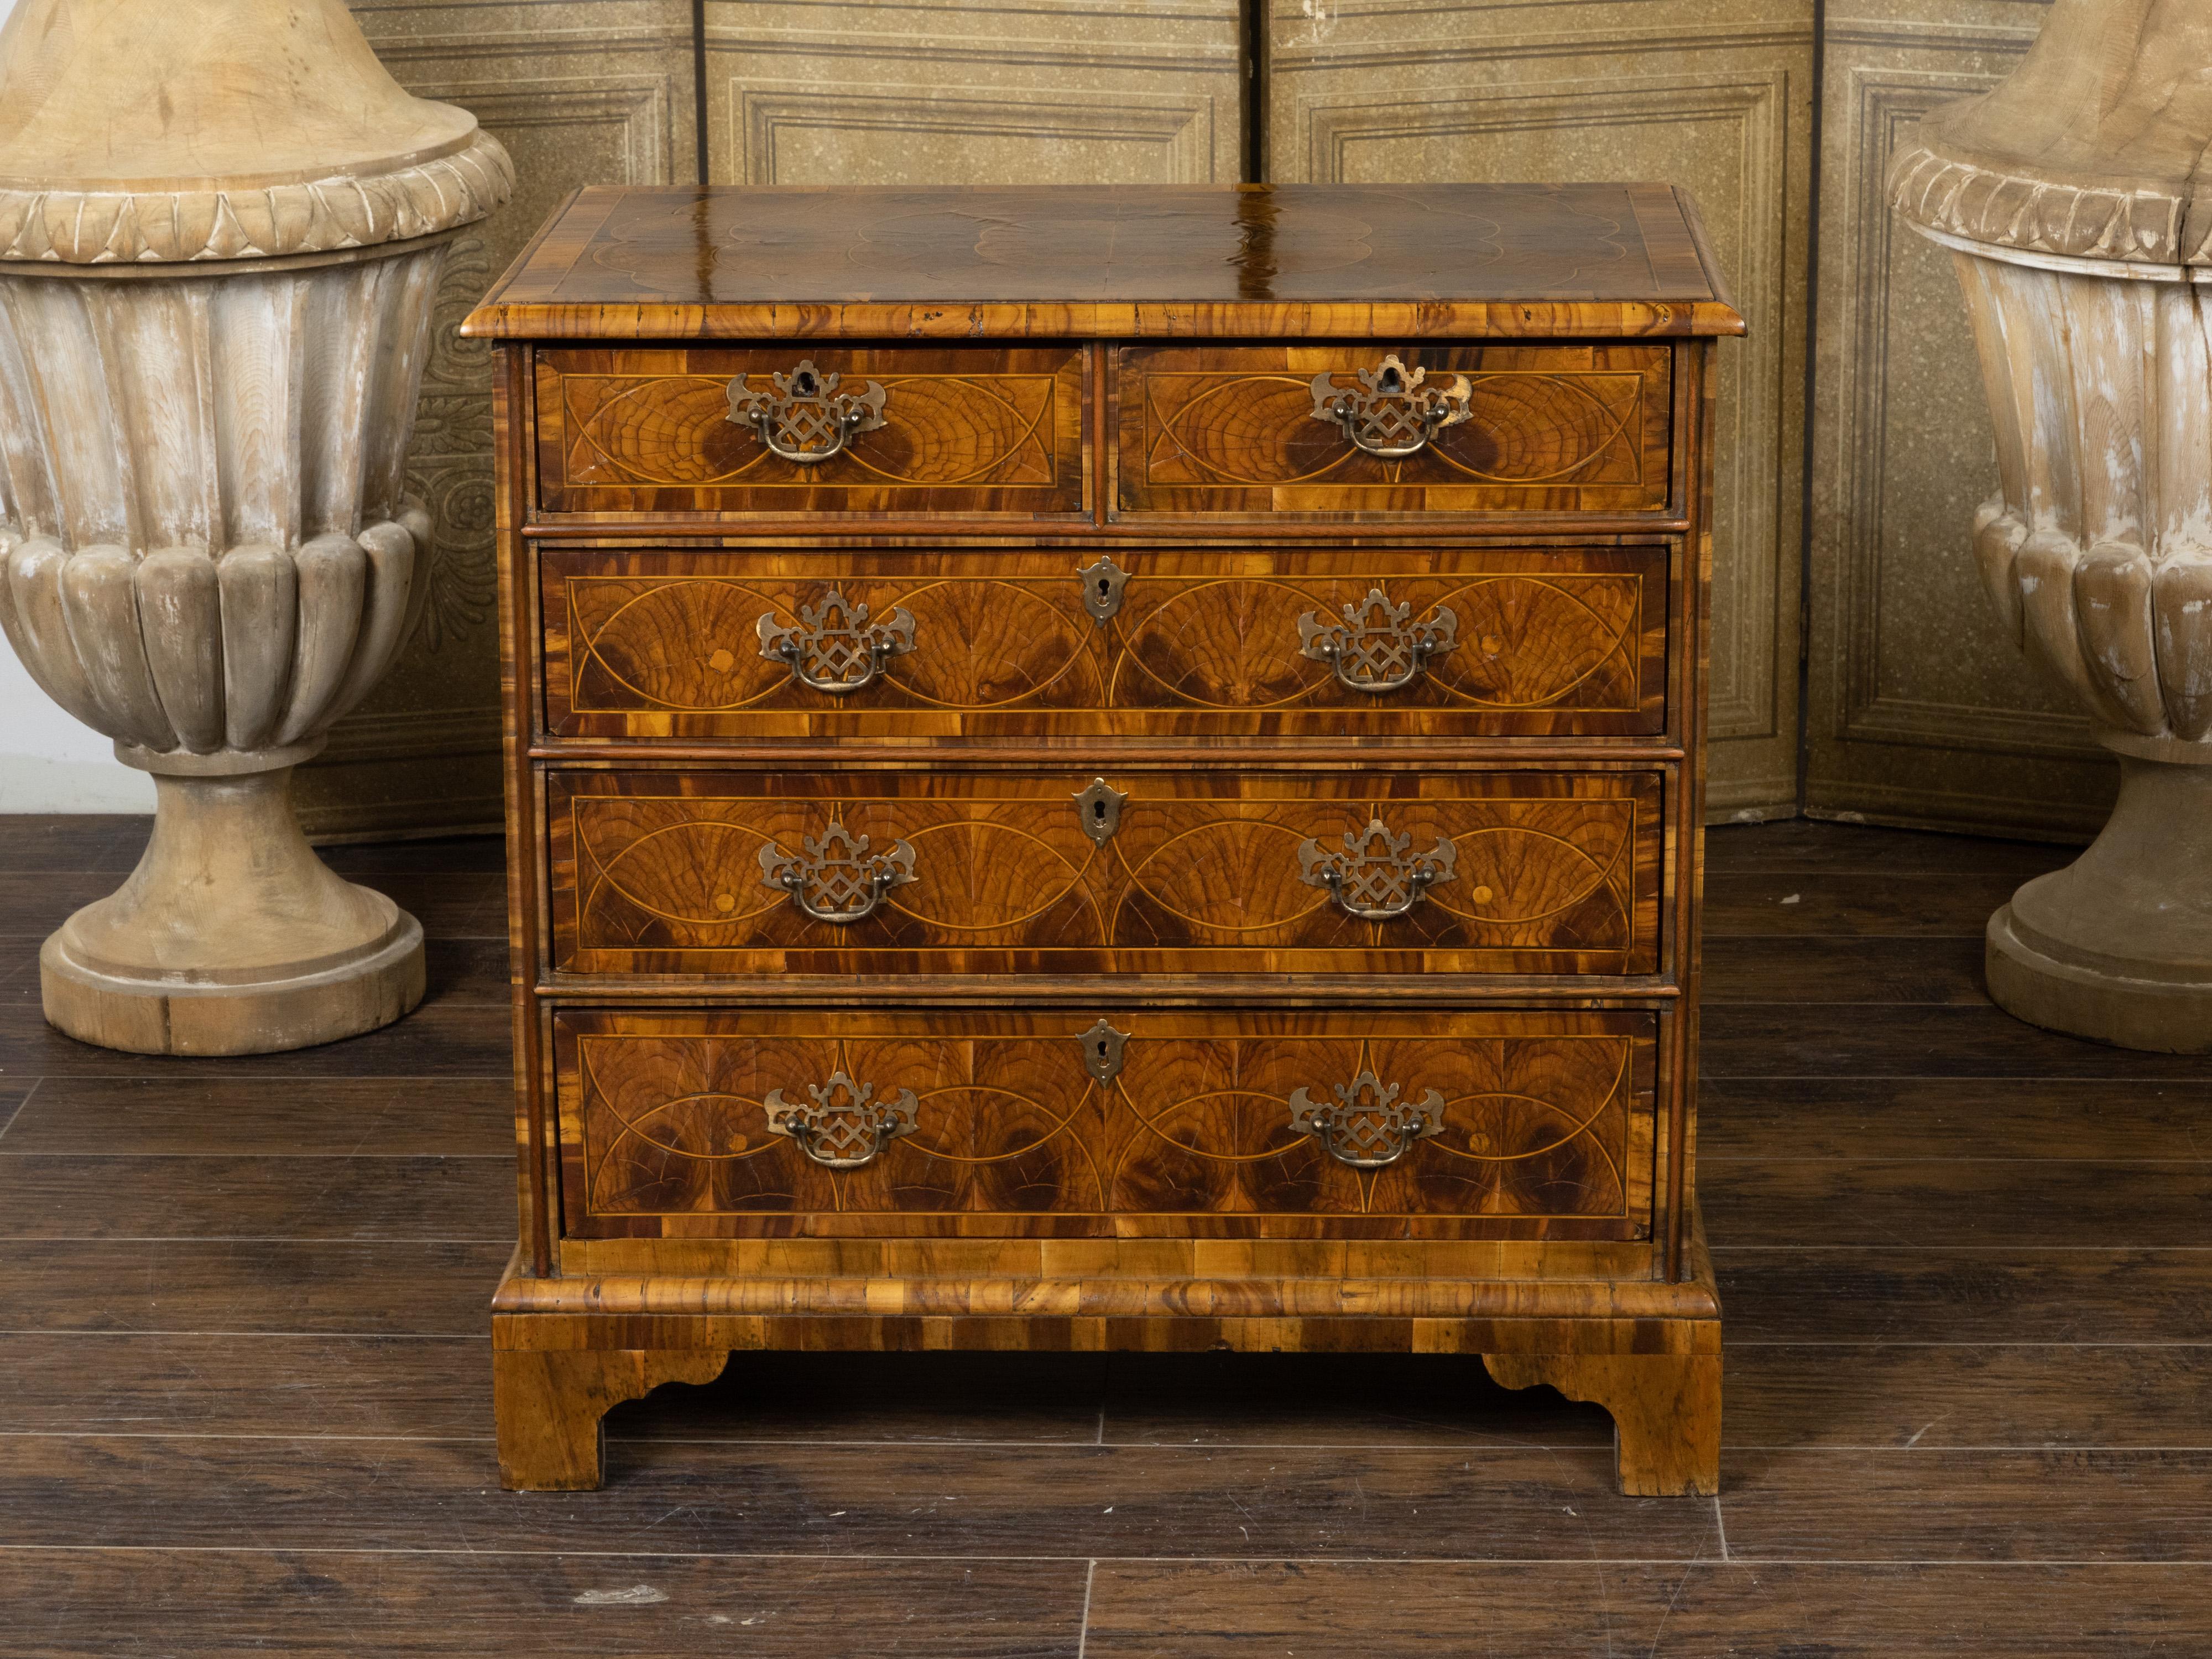 An English Georgian period walnut chest from the early 19th century with oyster veneer, five drawers and Chinese Chippendale style brass hardware. Created in England during the early years of the 19th century, this chest captures the attention with